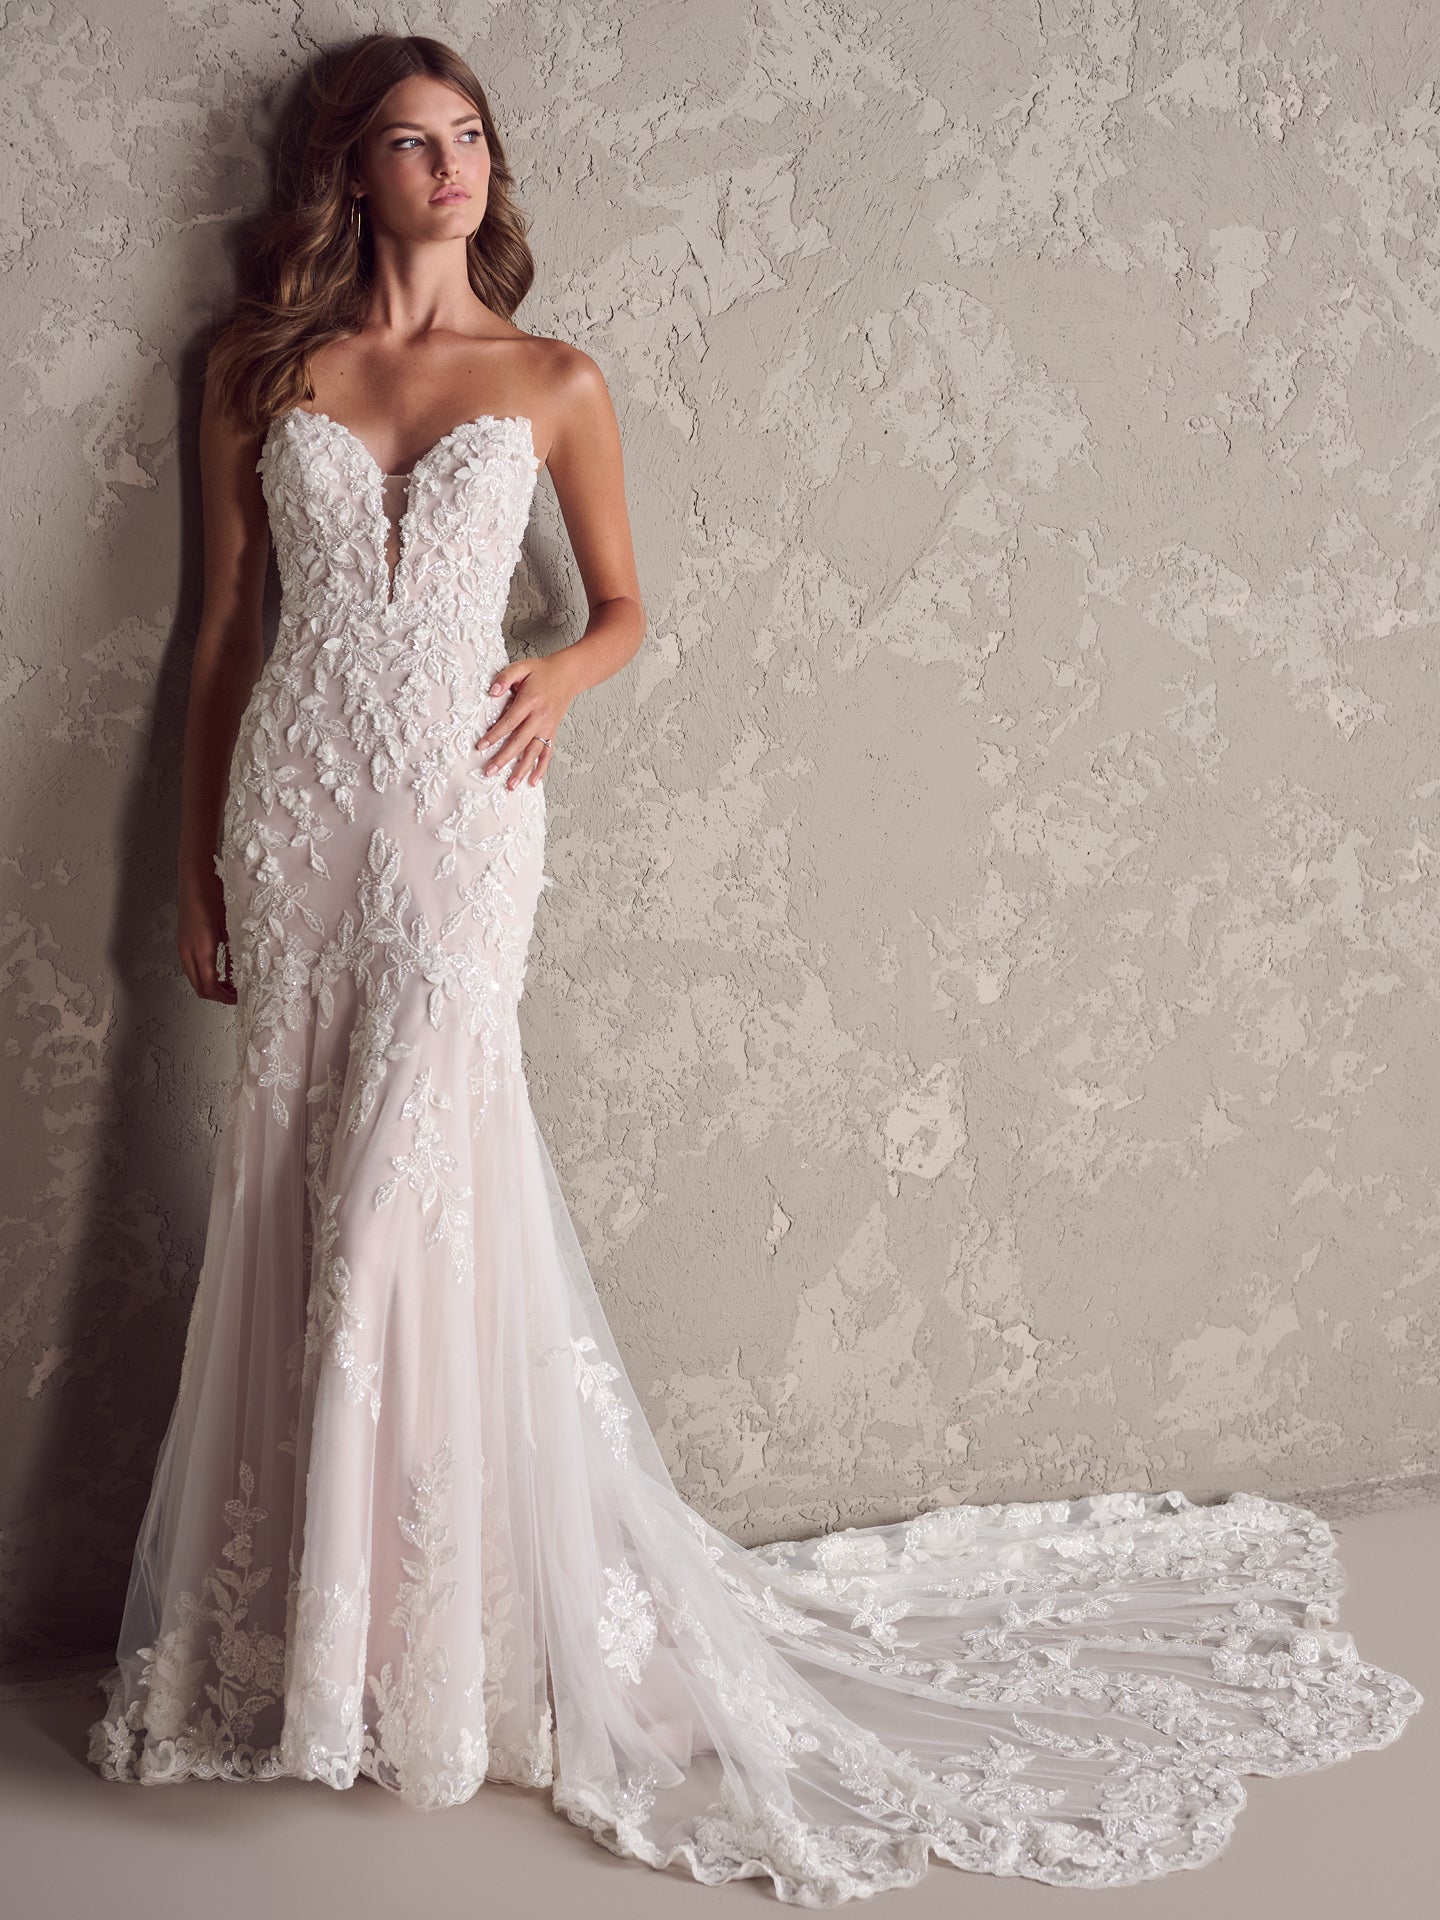 Romantic Floral Fit-and-Flare Gown by Maggie Sottero - Image 1